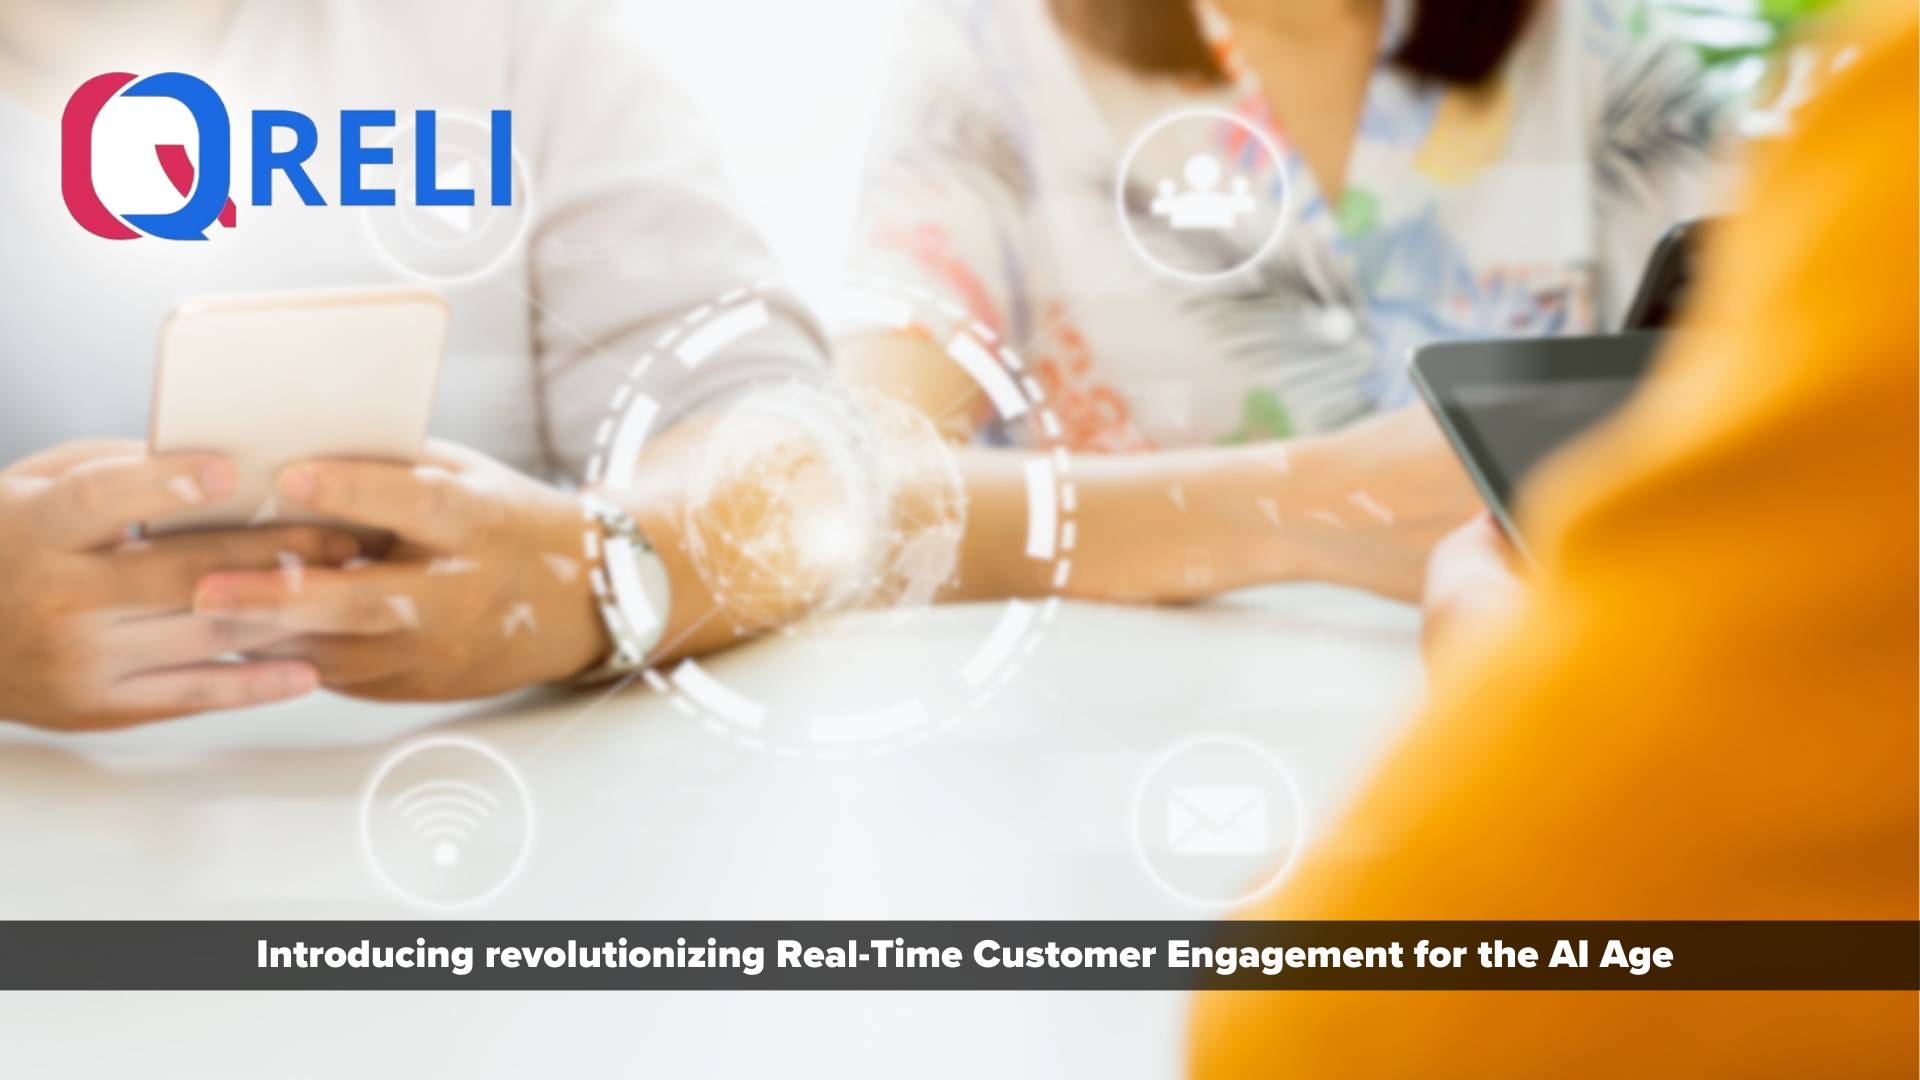 Introducing Qreli: Revolutionizing Real-Time Customer Engagement for the AI Age